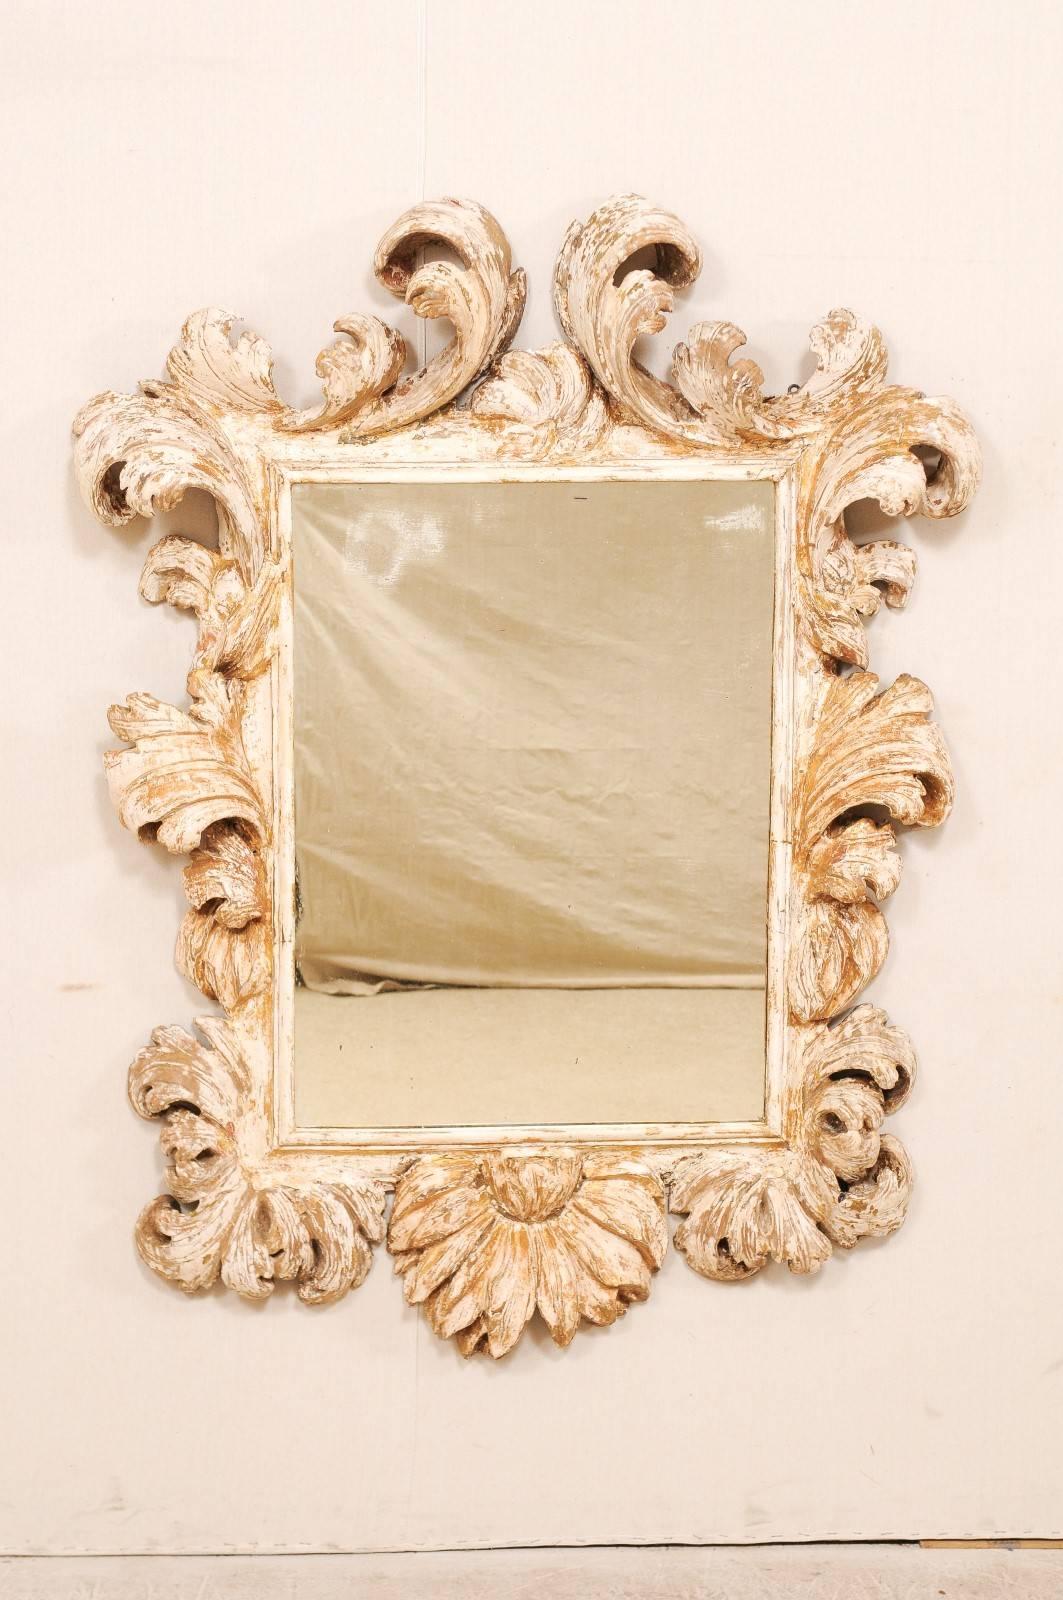 An early 18th century Italian period Baroque beautifully carved mirror. This elaborate antique Italian mirror features a richly carved ornate acanthus leaf surround with gesso and traces of gilt throughout the frame. The carved details are